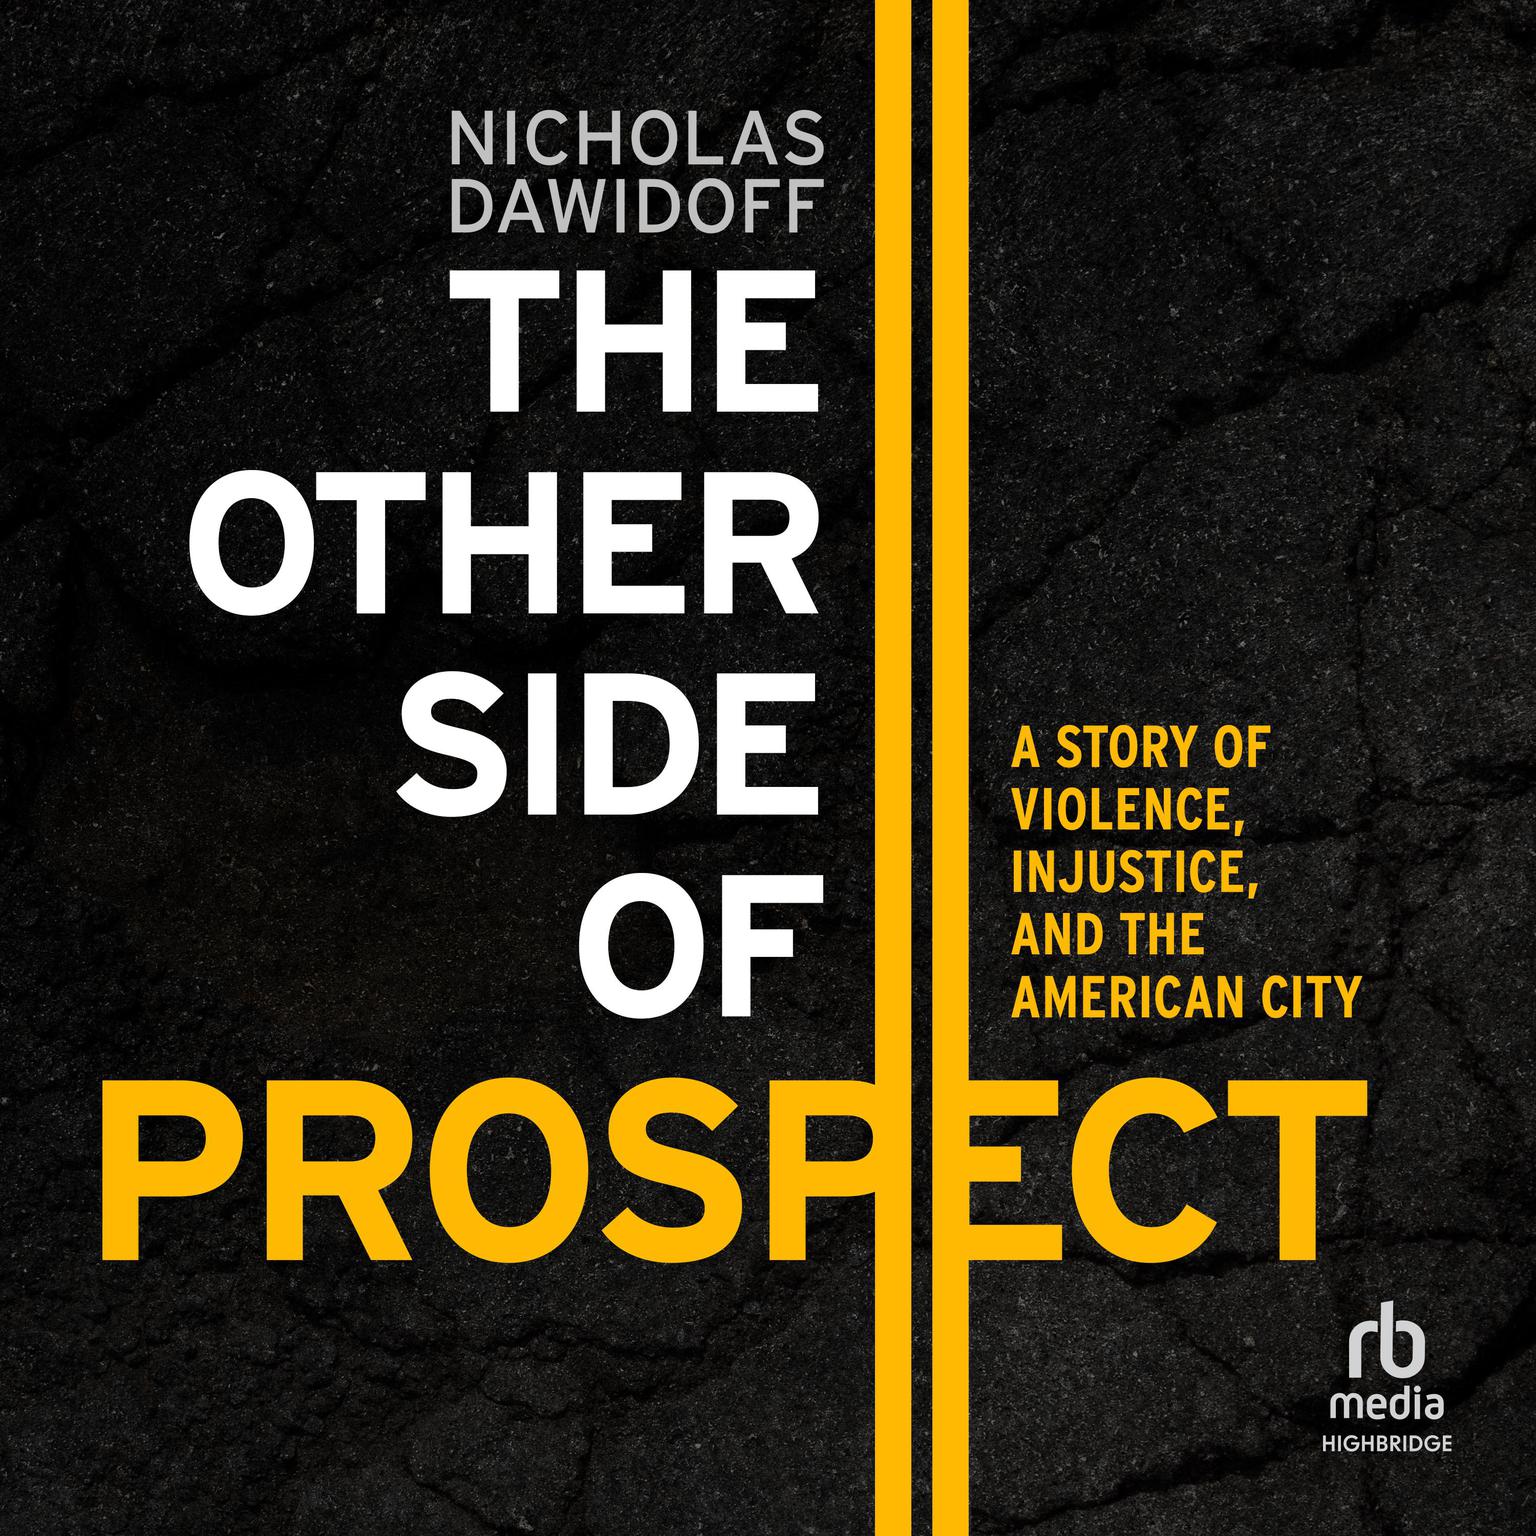 The Other Side of Prospect: A Story of Violence, Injustice, and the American City Audiobook, by Nicholas Dawidoff